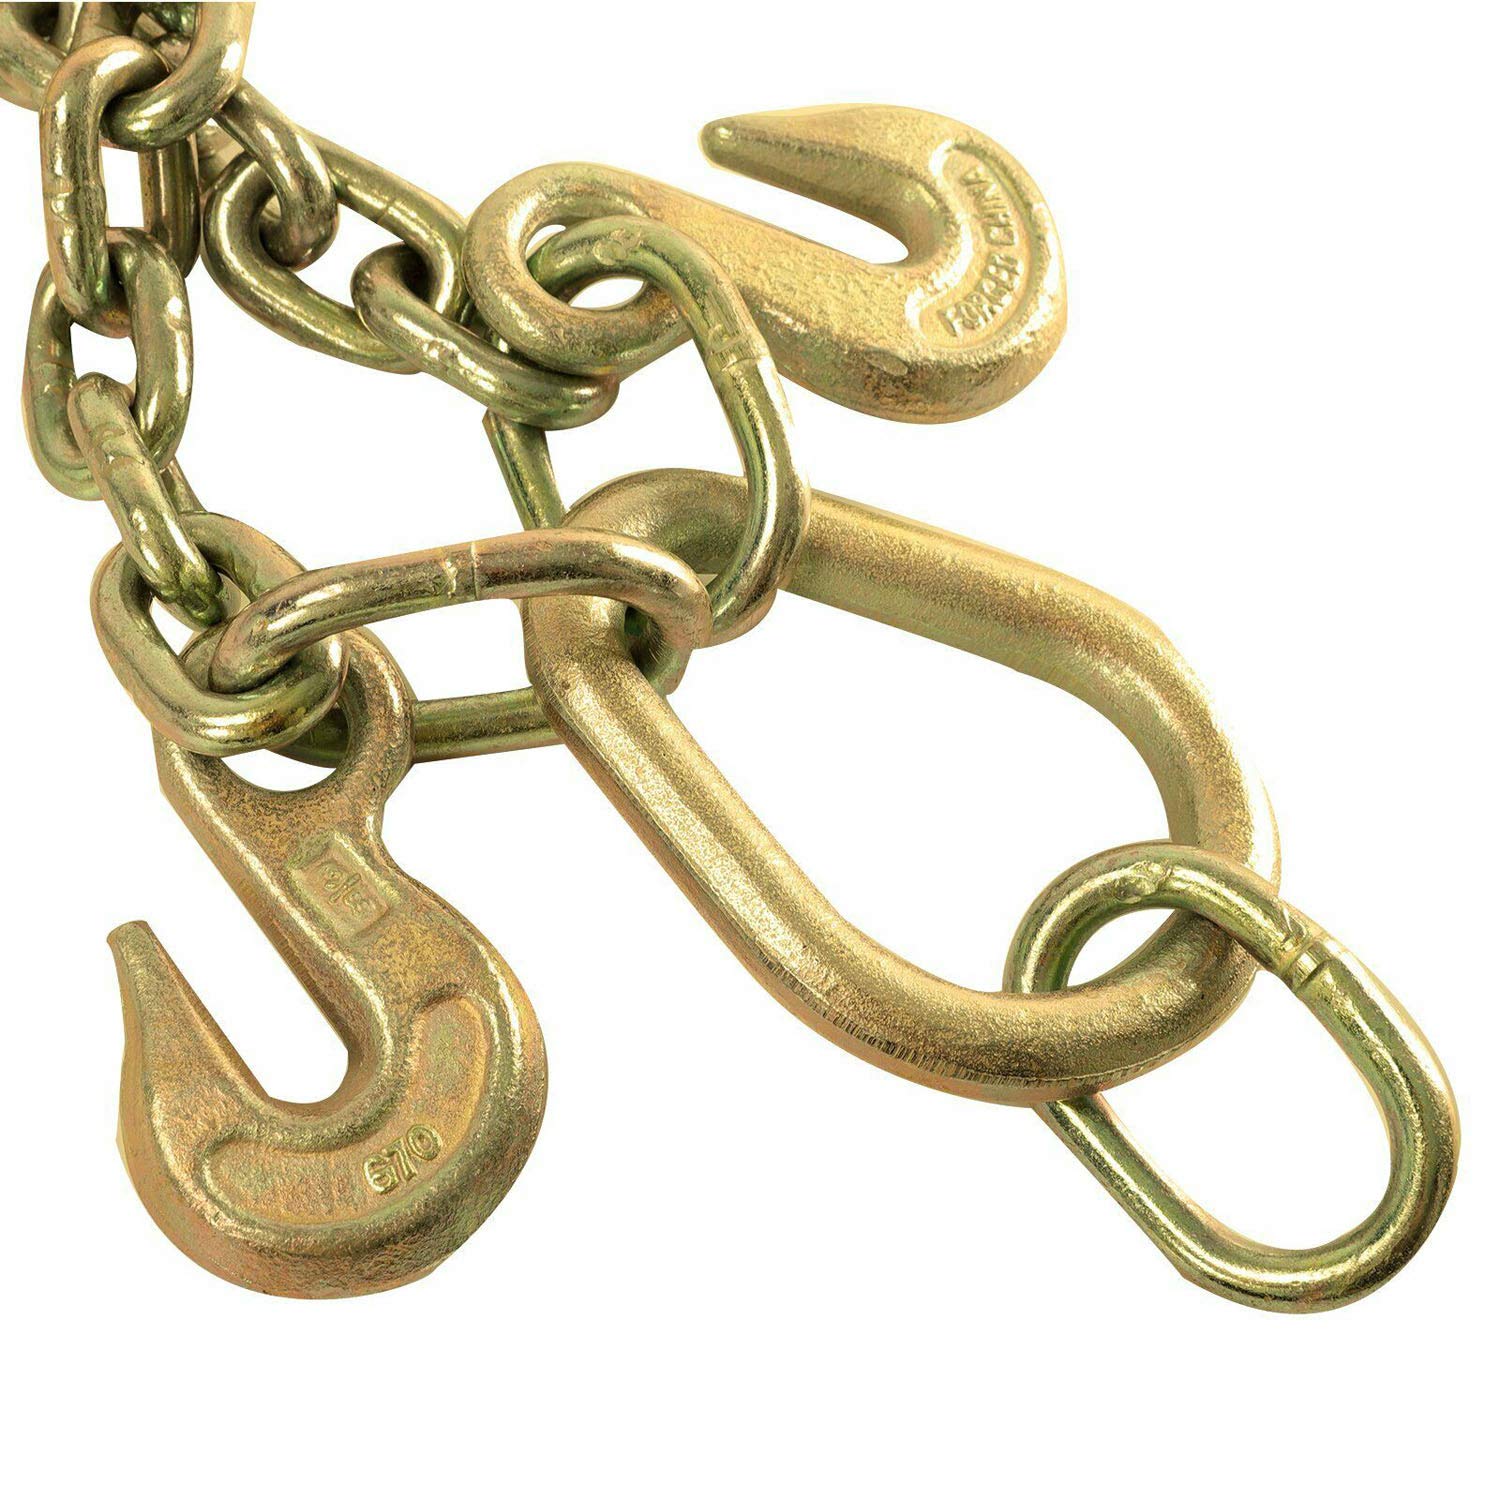 Generic TYFYB G70 Steel Towing Chain Bridle 3/8" X 2' V-Type Tow Chain with 15 Inch J-Hooks Link 2 inch Legs?Gold Tractor Car Wrec